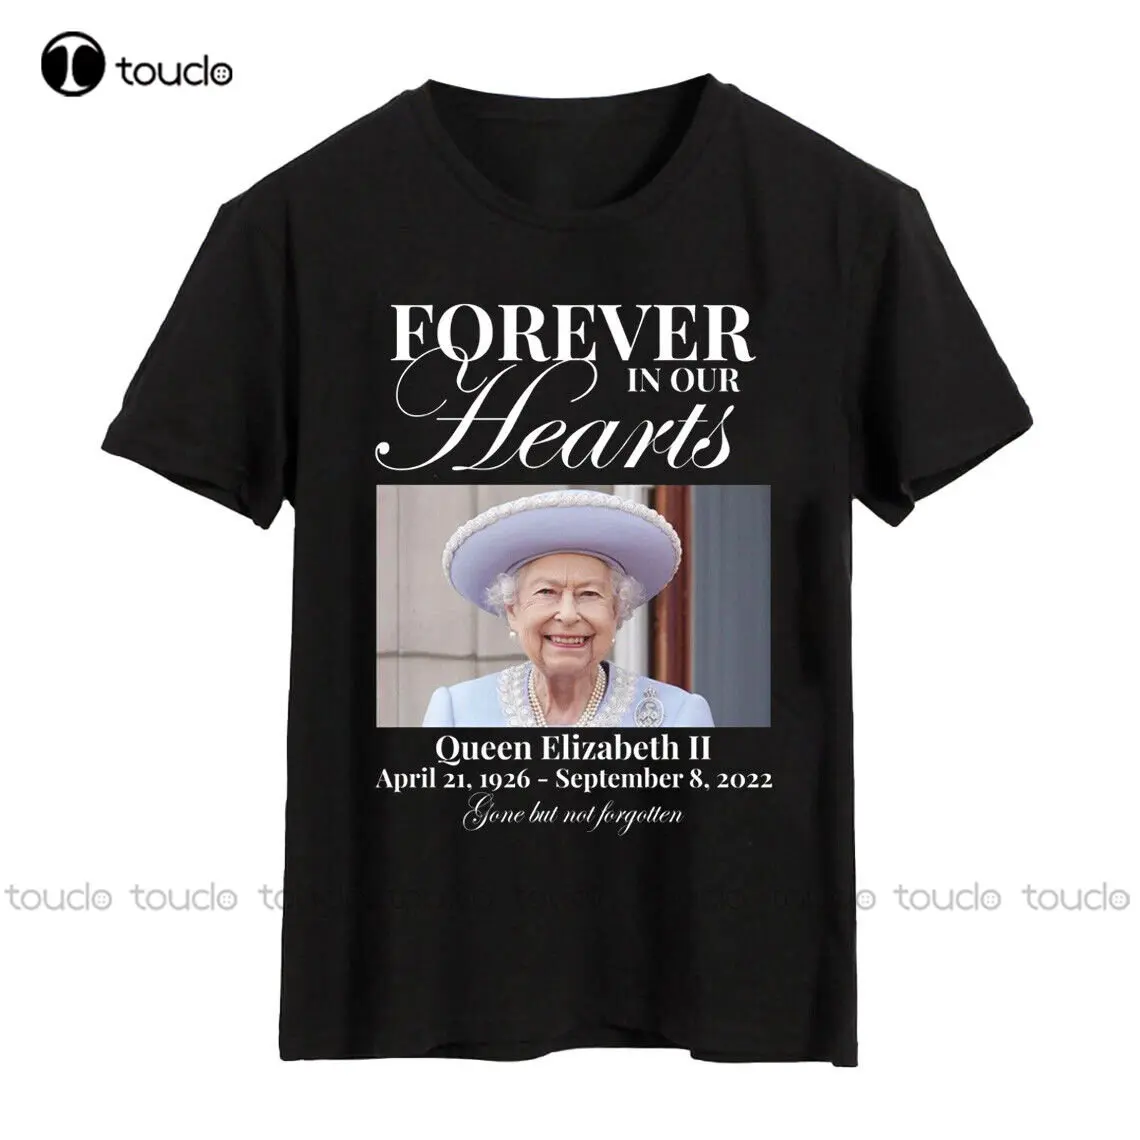 Rip Queen Elizabeth Ii 1926 2022 Forever In Our Hearts Rest Peace T-Shirt S-5Xl Commemorative Tee Shirt Xs-5Xl Tribute Shirts